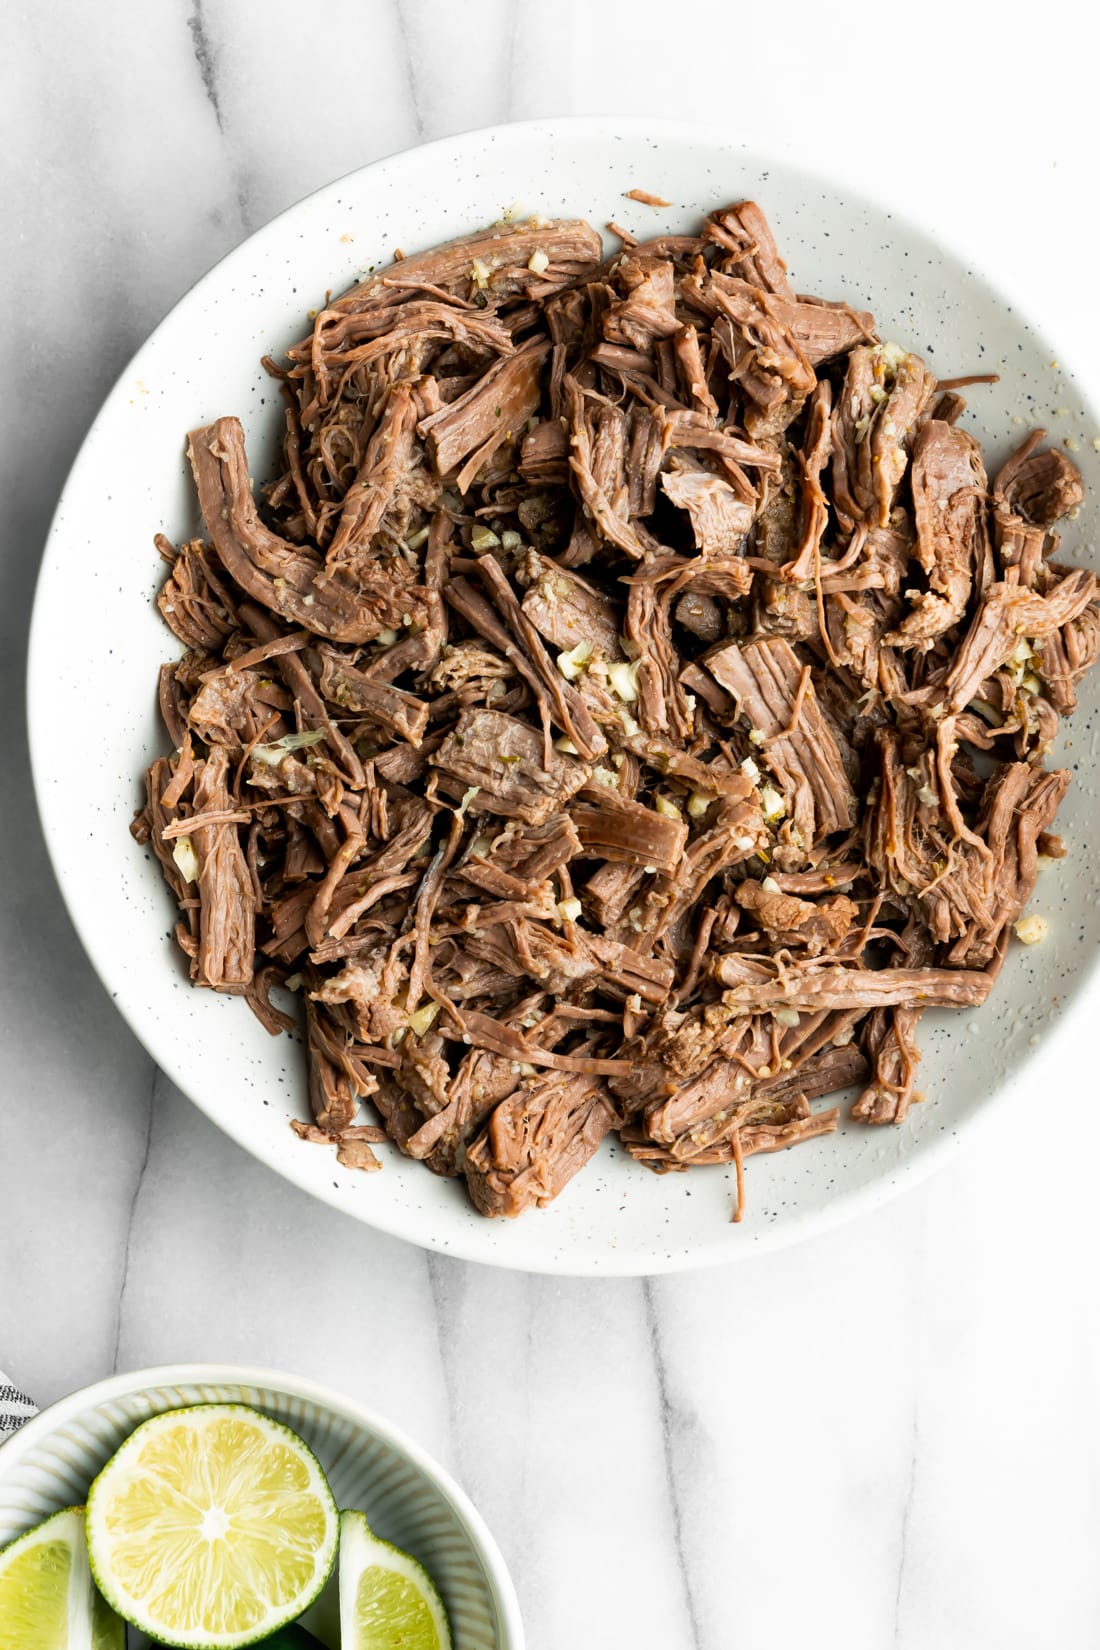 shredded beef on a white plate with minced garlic before pan frying